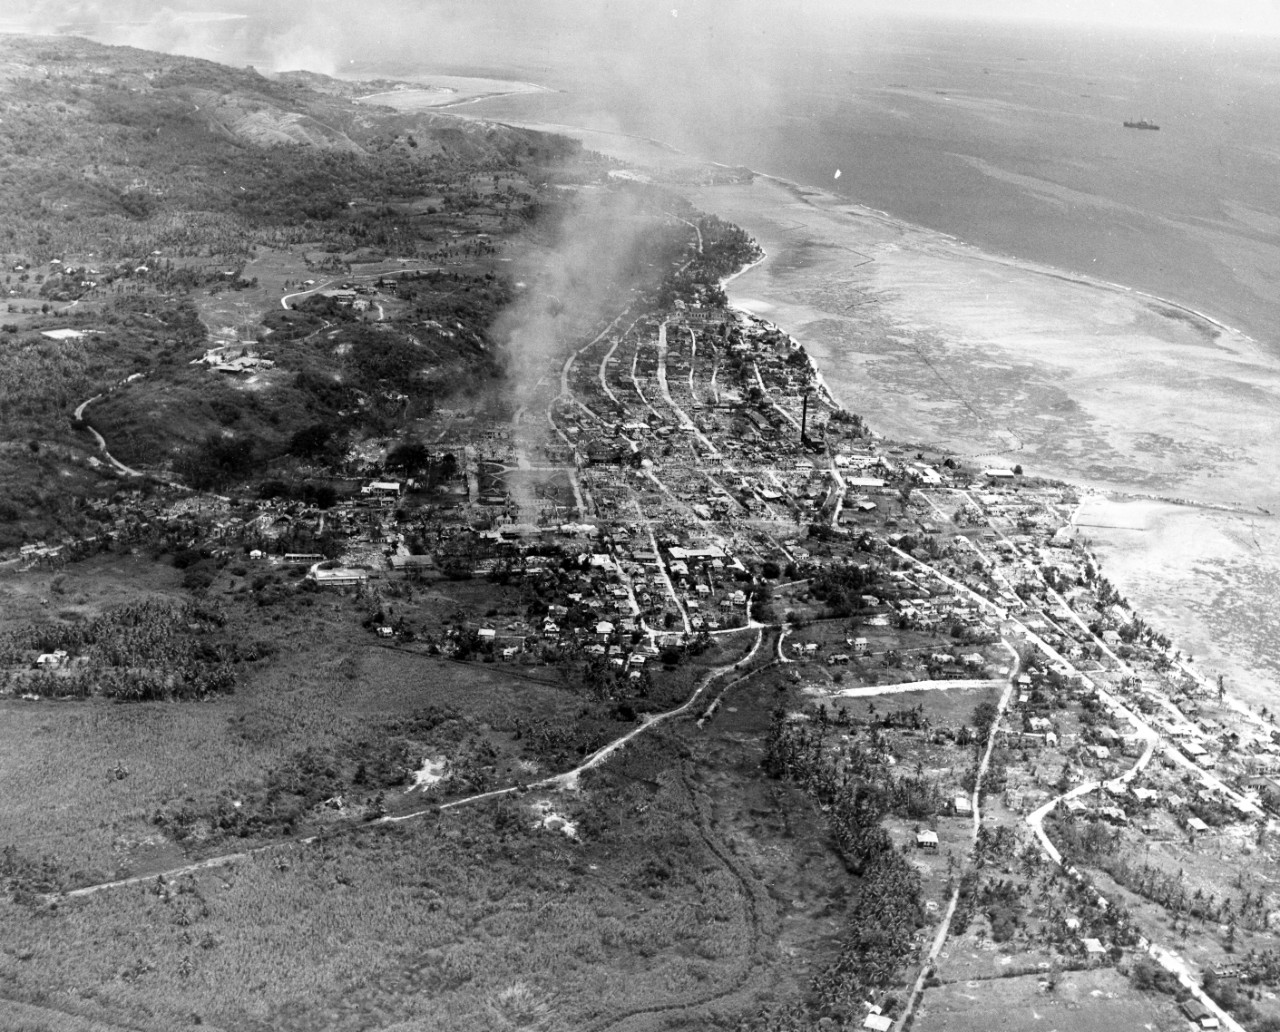 Aerial view of Agana, Guam. Photo taken by plane from USS Yorktown (CV-10). September 5, 1944. Image is from the CAPT Hays R. Browning Photo Collection. 